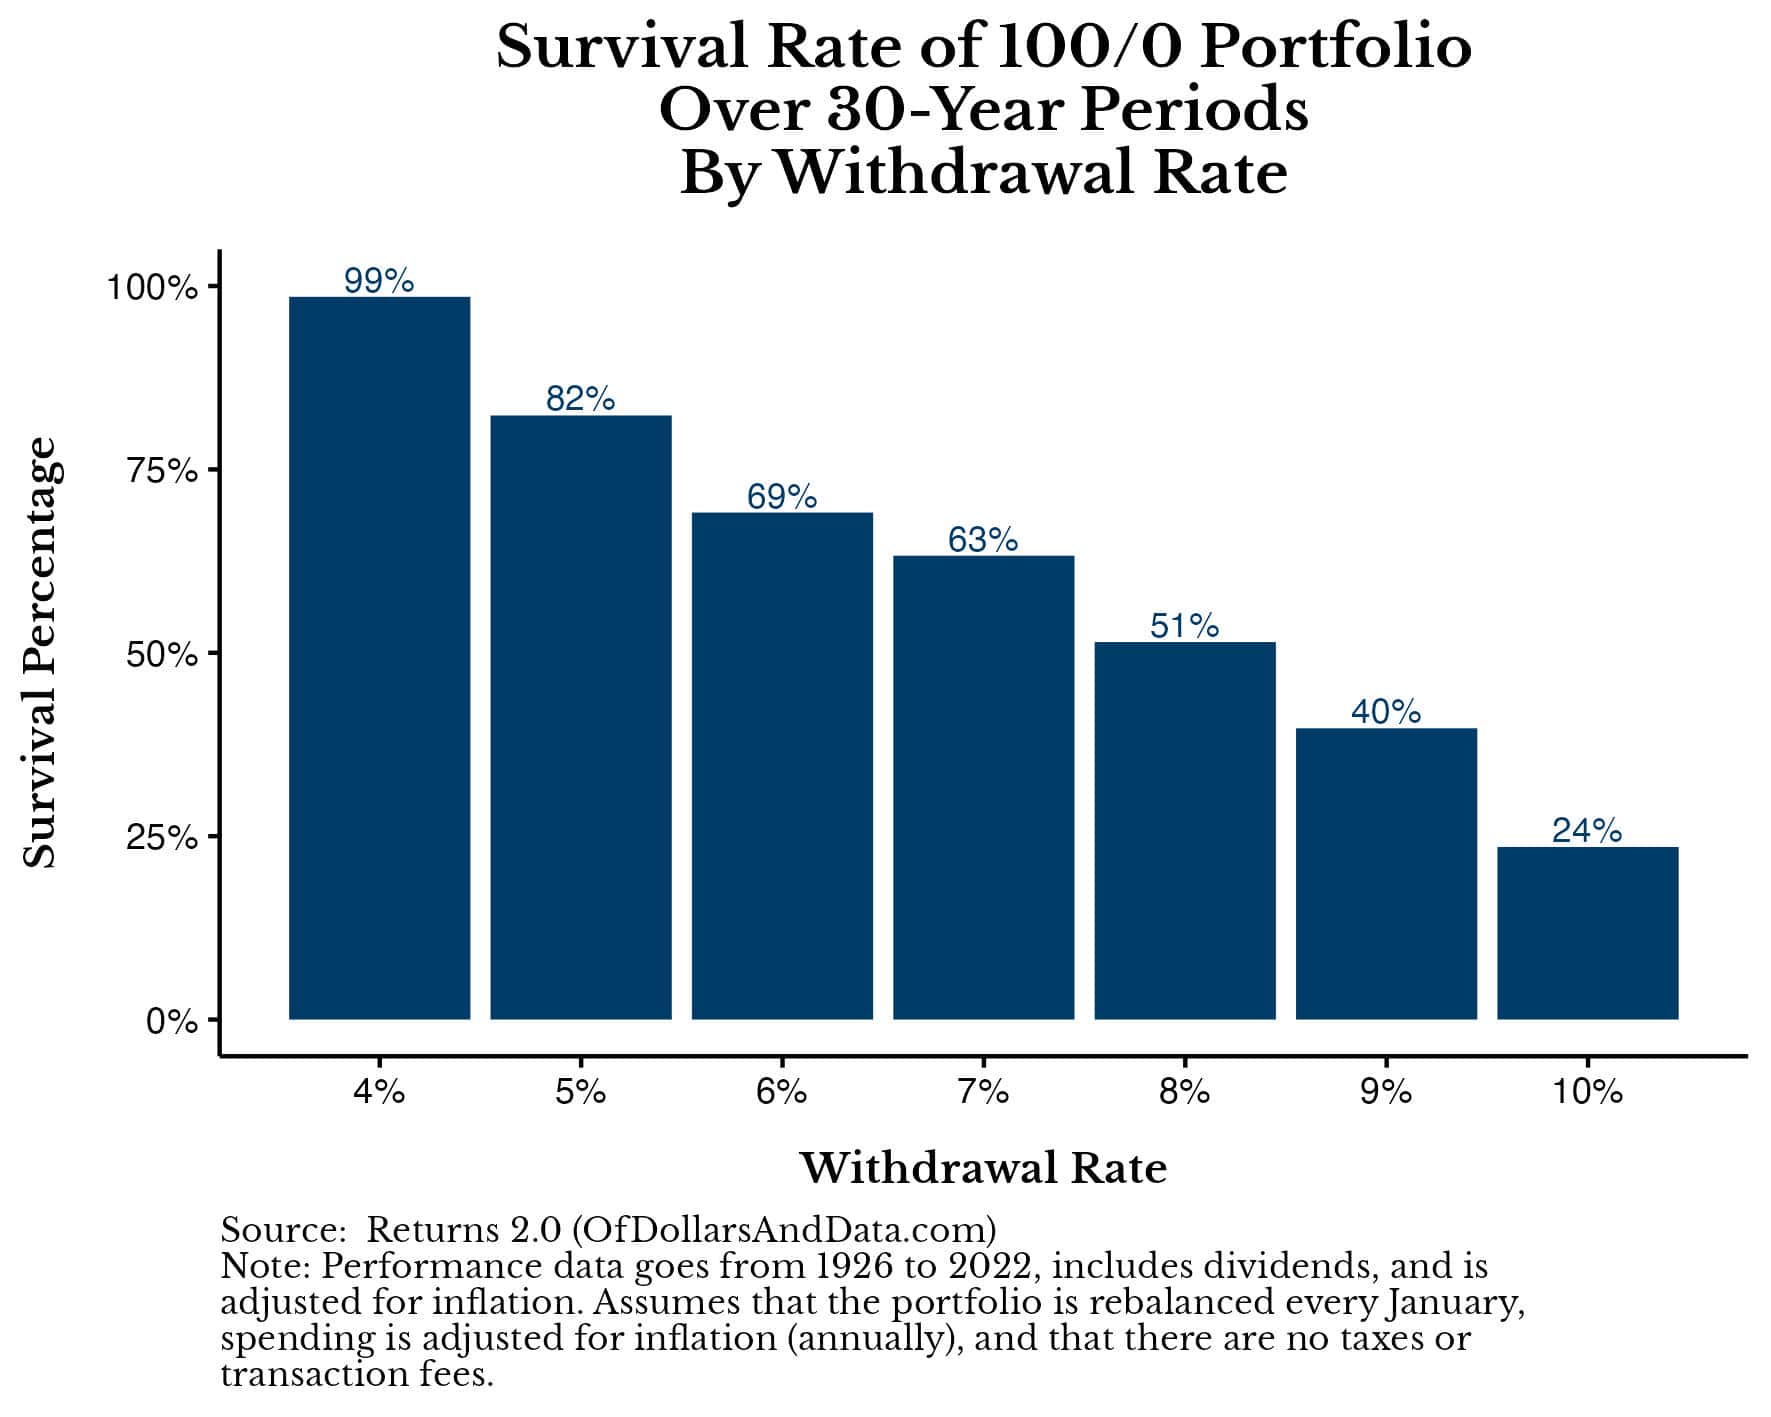 Chart showing the safe withdrawal rate simulation results for a 100/0 (All Stock) portfolio from 1926-2022.